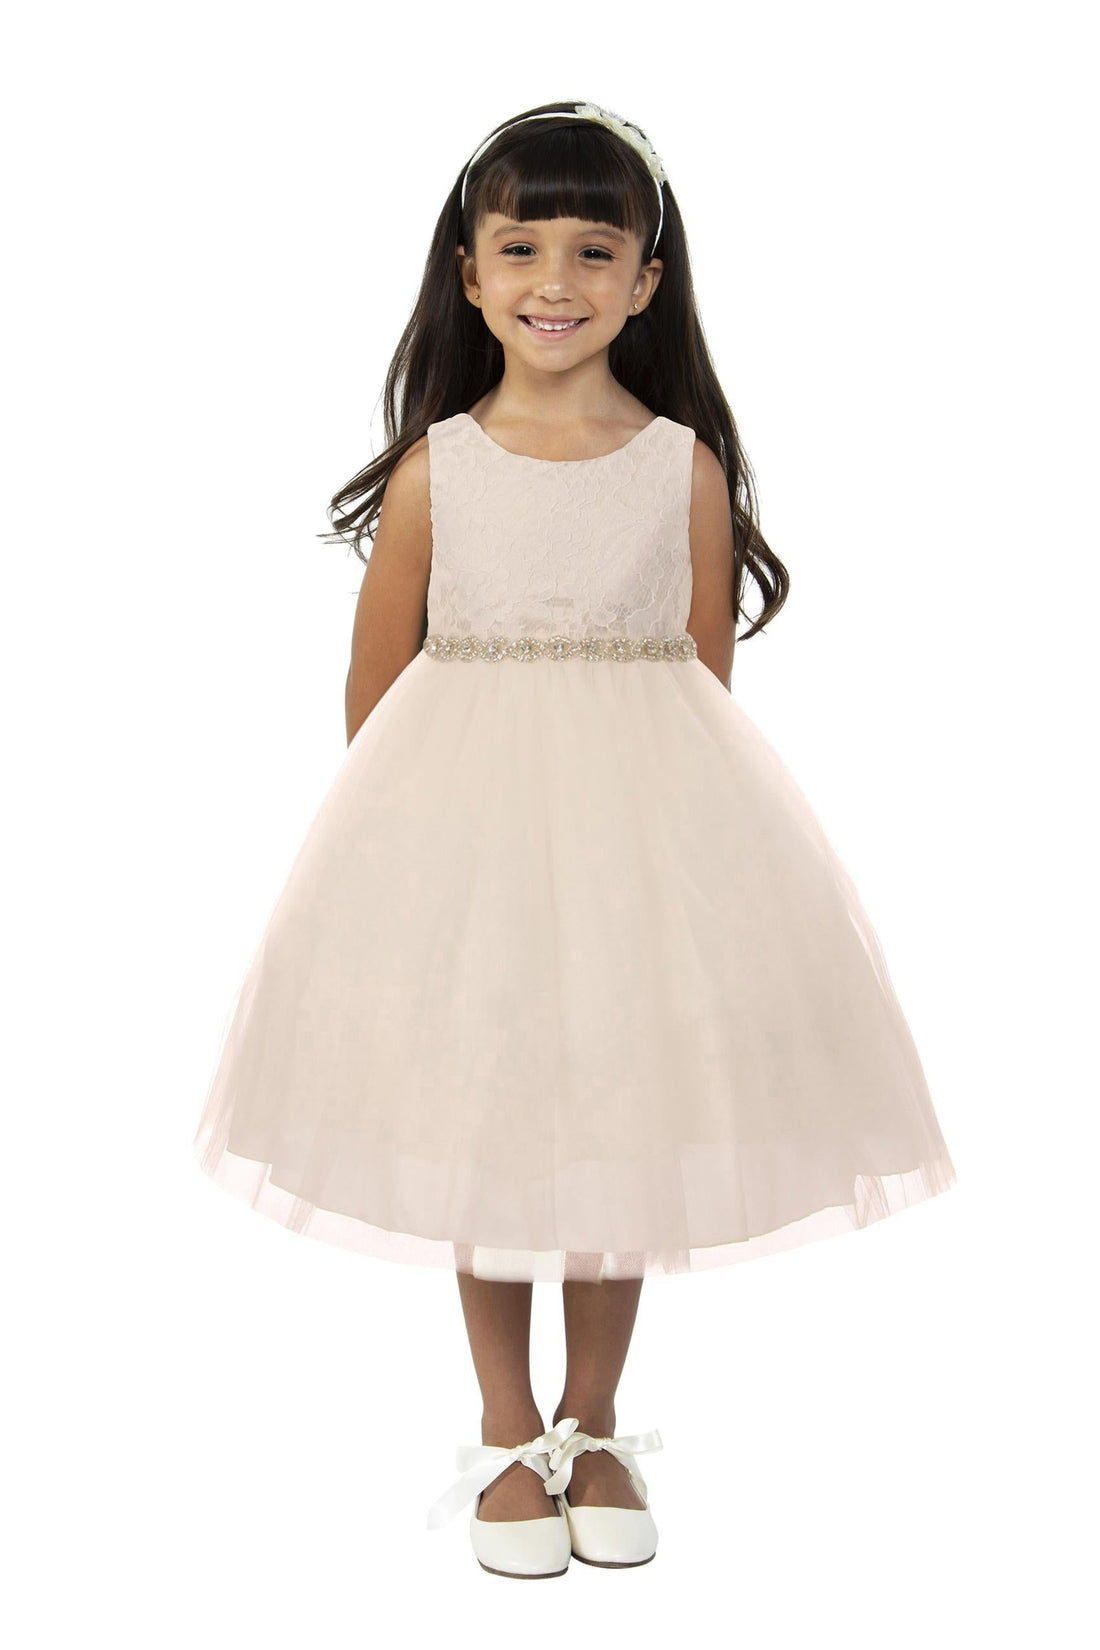 Lace with Rhinestone Trim Girl Party Dress by AS456A Kids Dream - Girl Formal Dresses